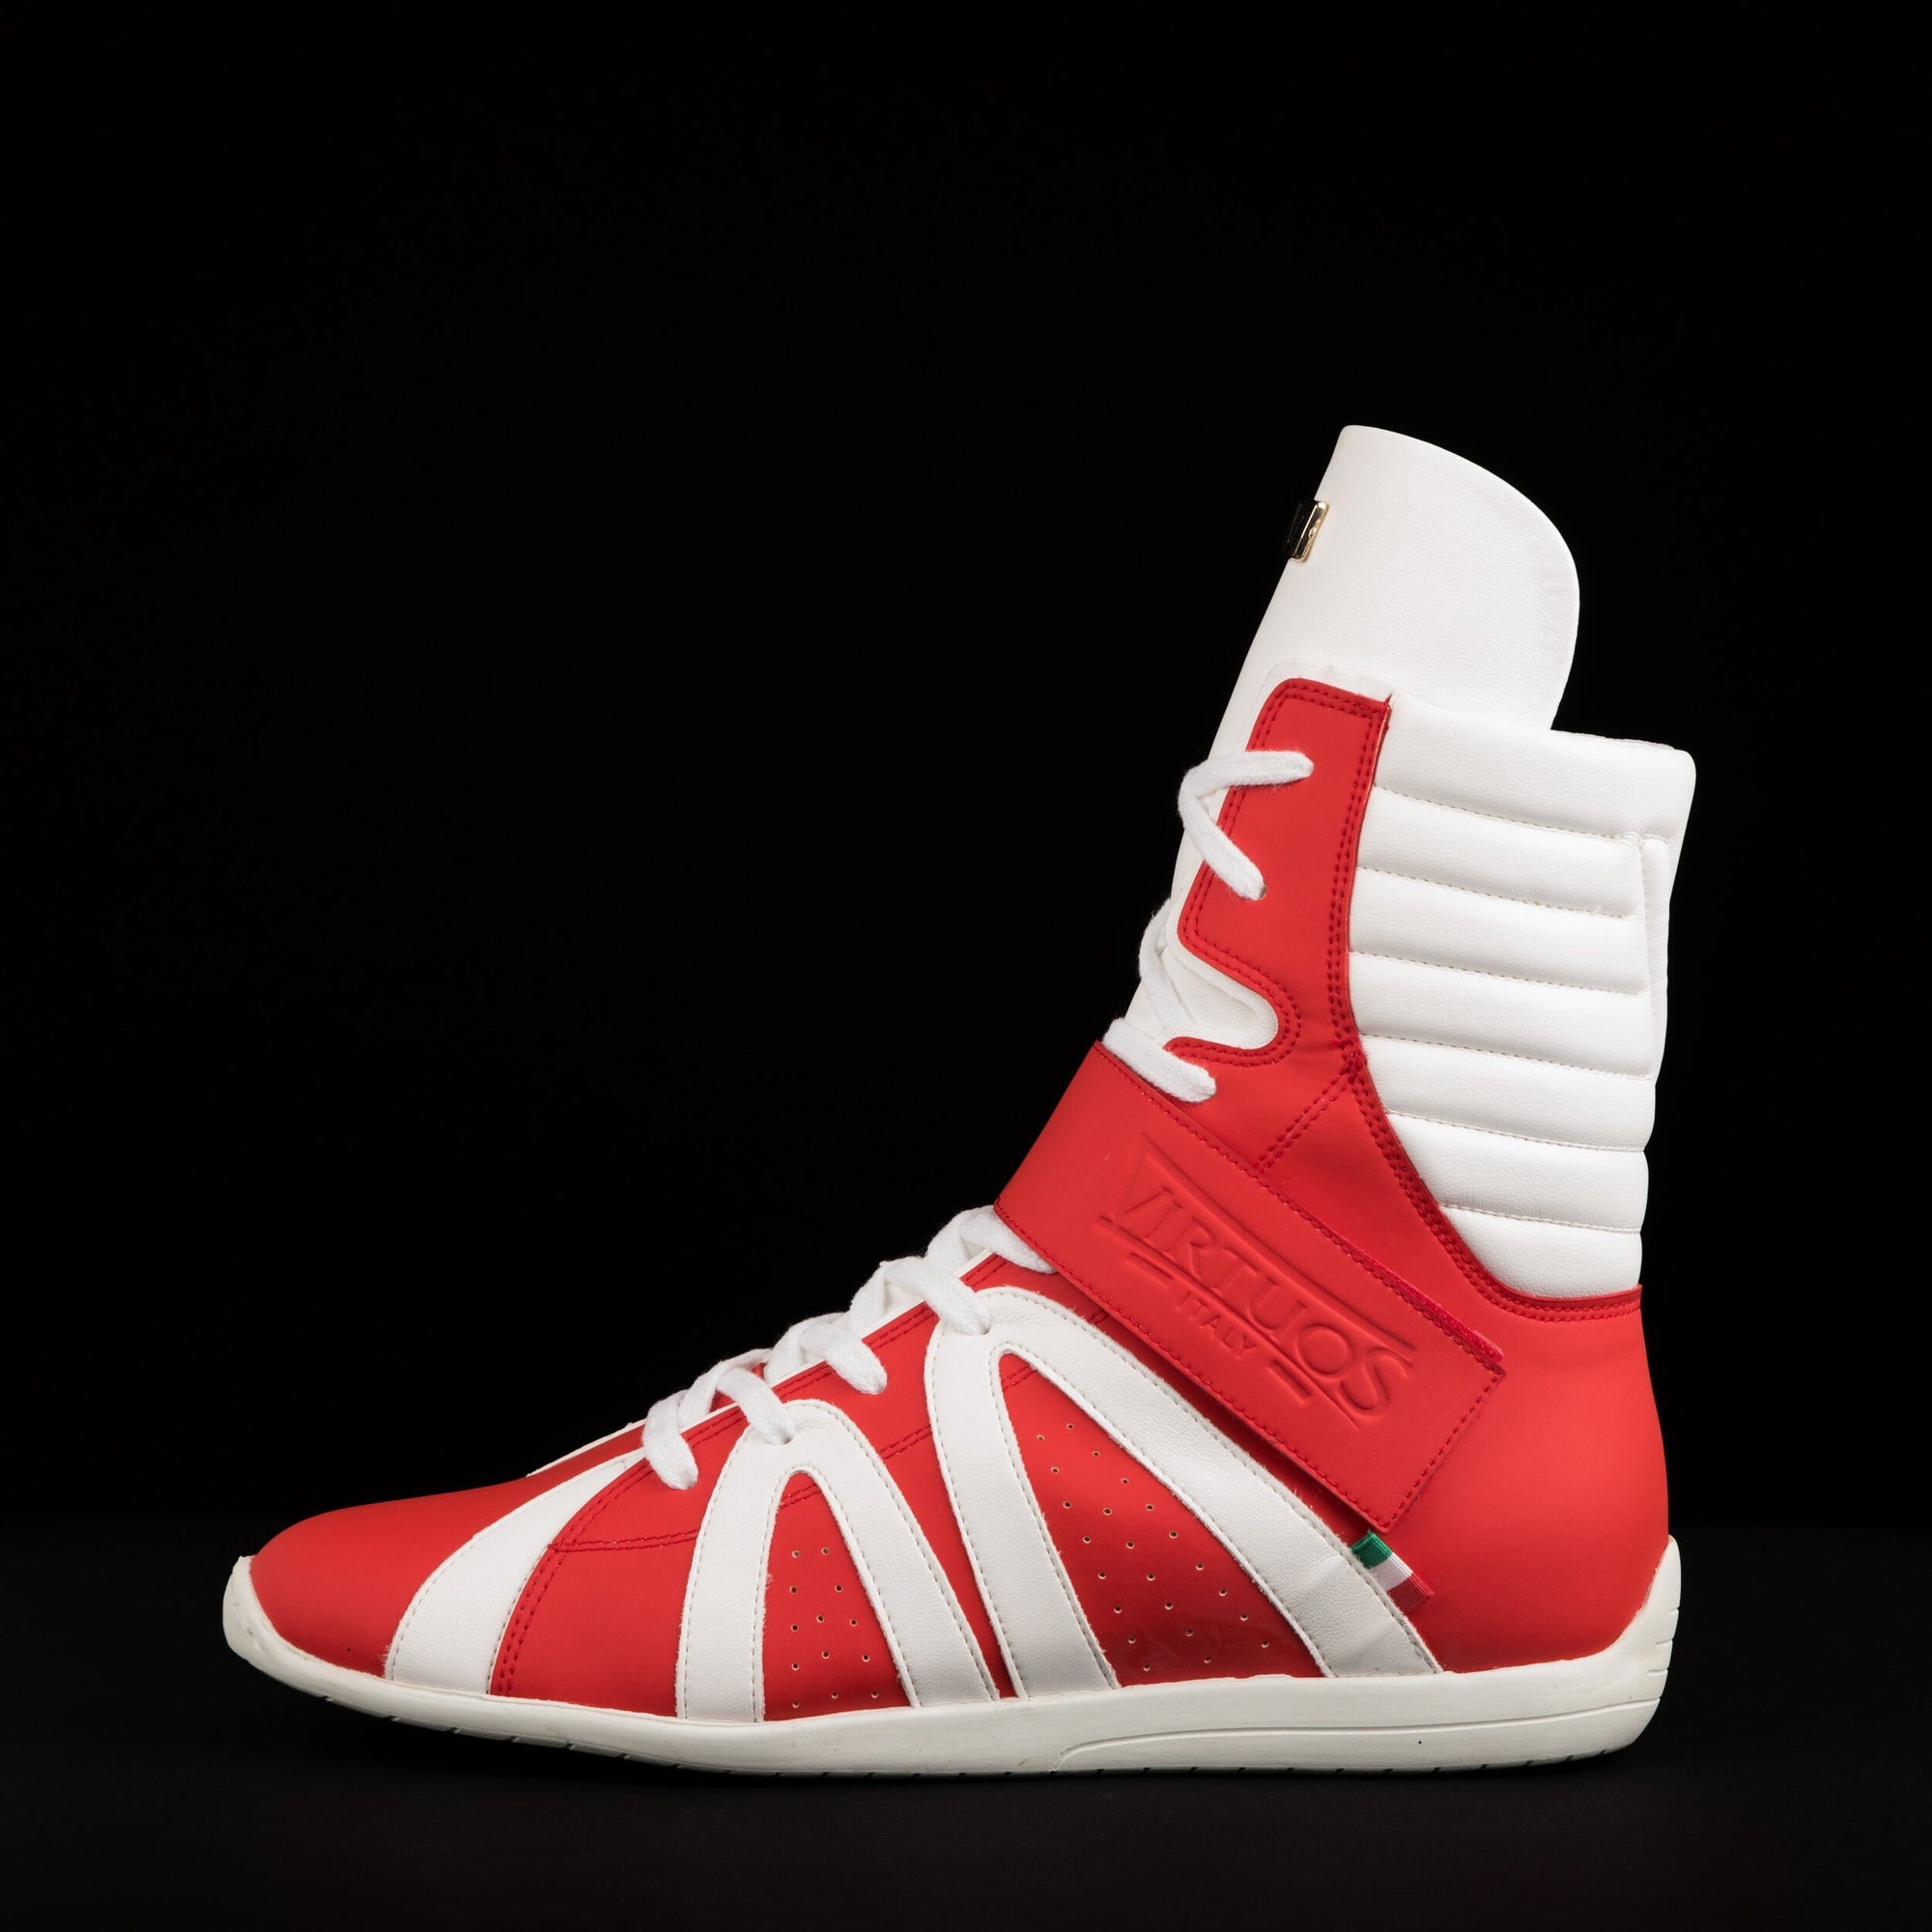 design red white high top boxing shoes freee shipping